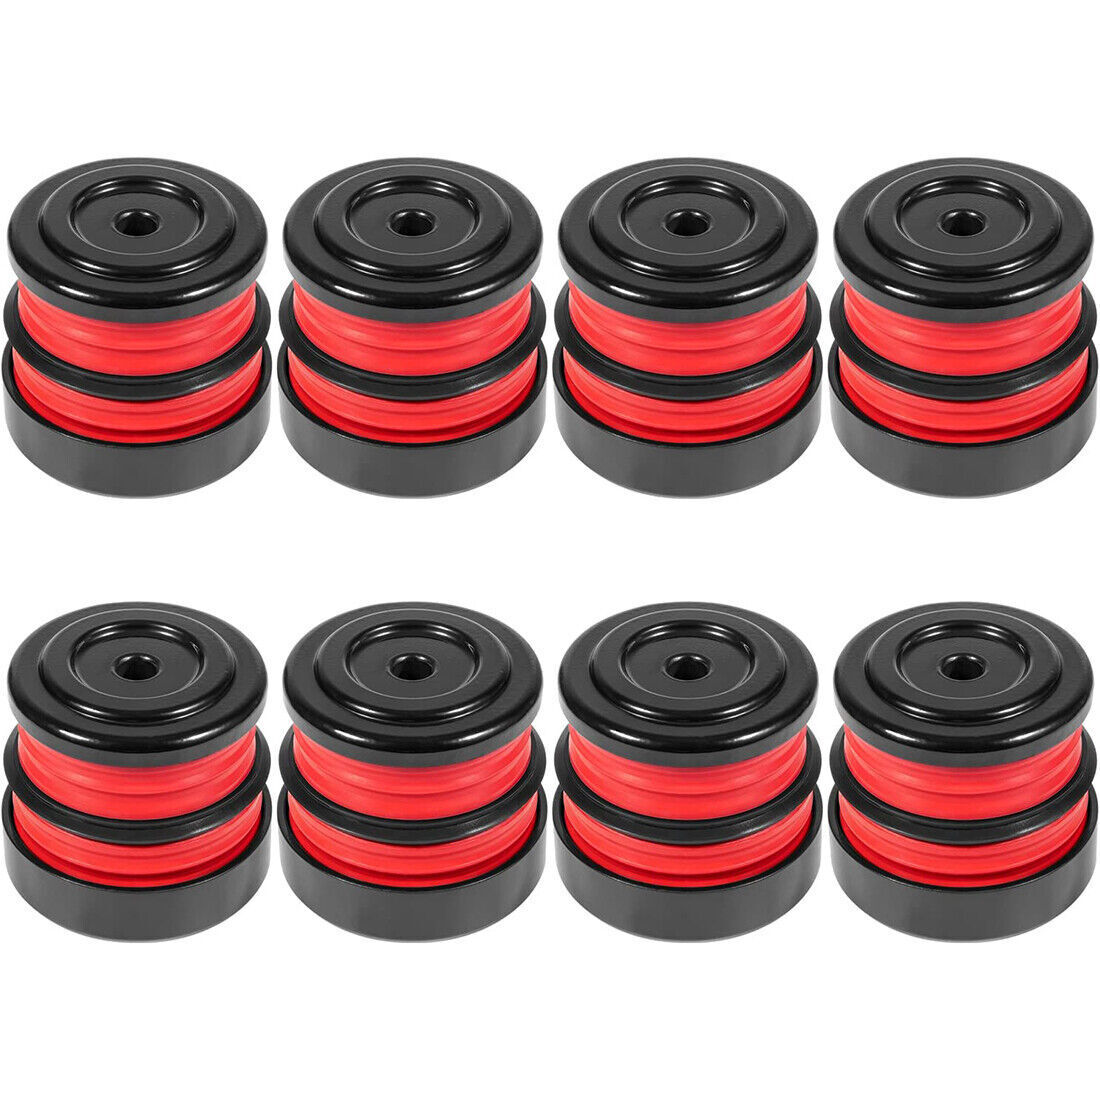 Silicone Body Mount Bushing Kit For 08-16 Ford F-250/F-350 Super Duty Crew Cab